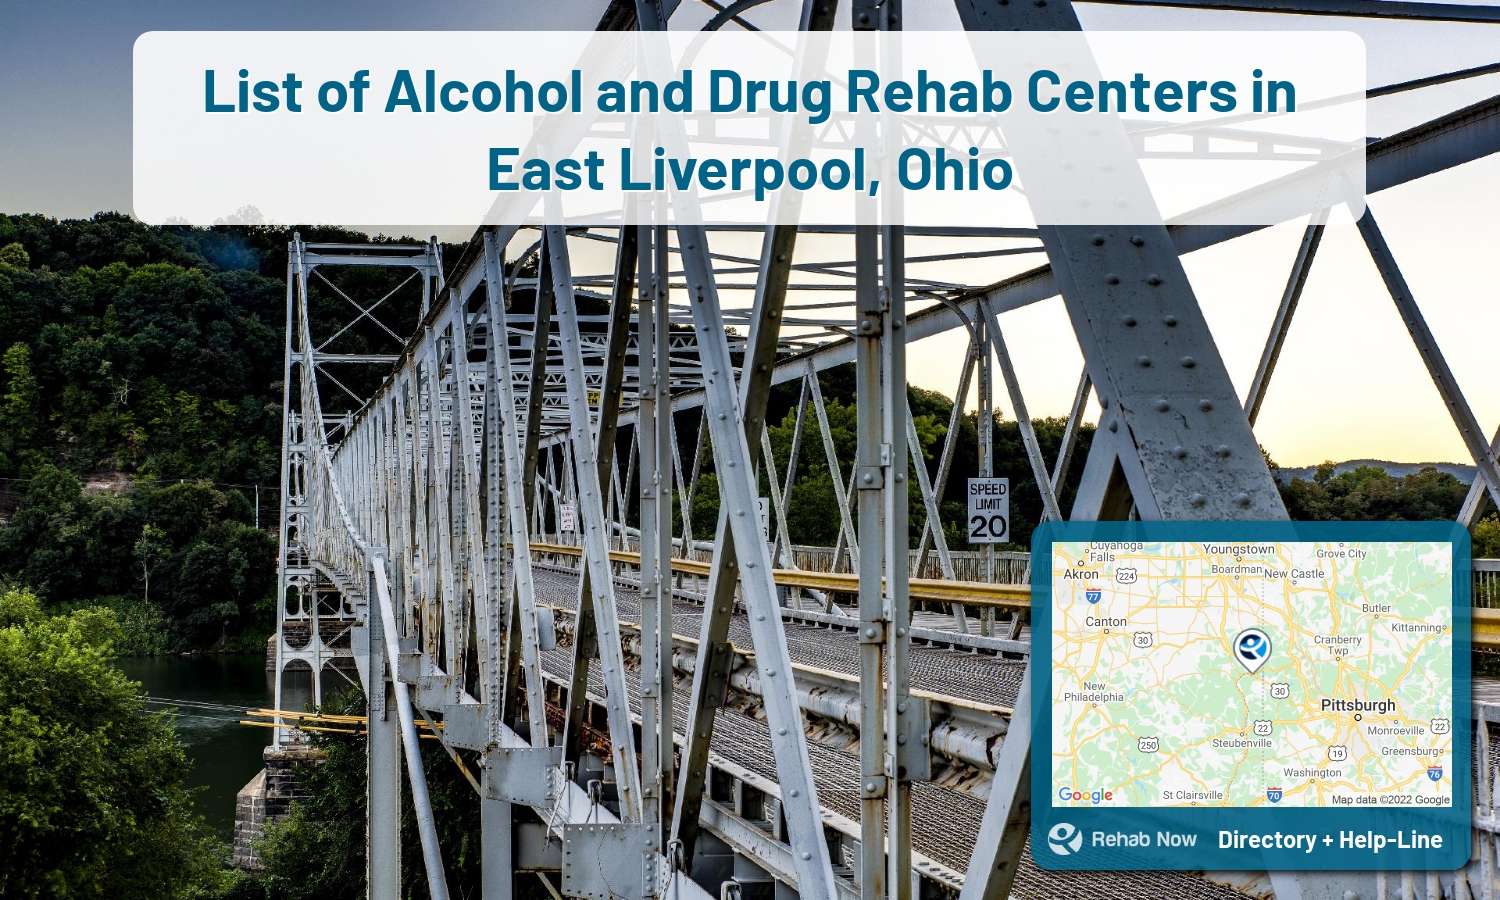 East Liverpool, OH Treatment Centers. Find drug rehab in East Liverpool, Ohio, or detox and treatment programs. Get the right help now!